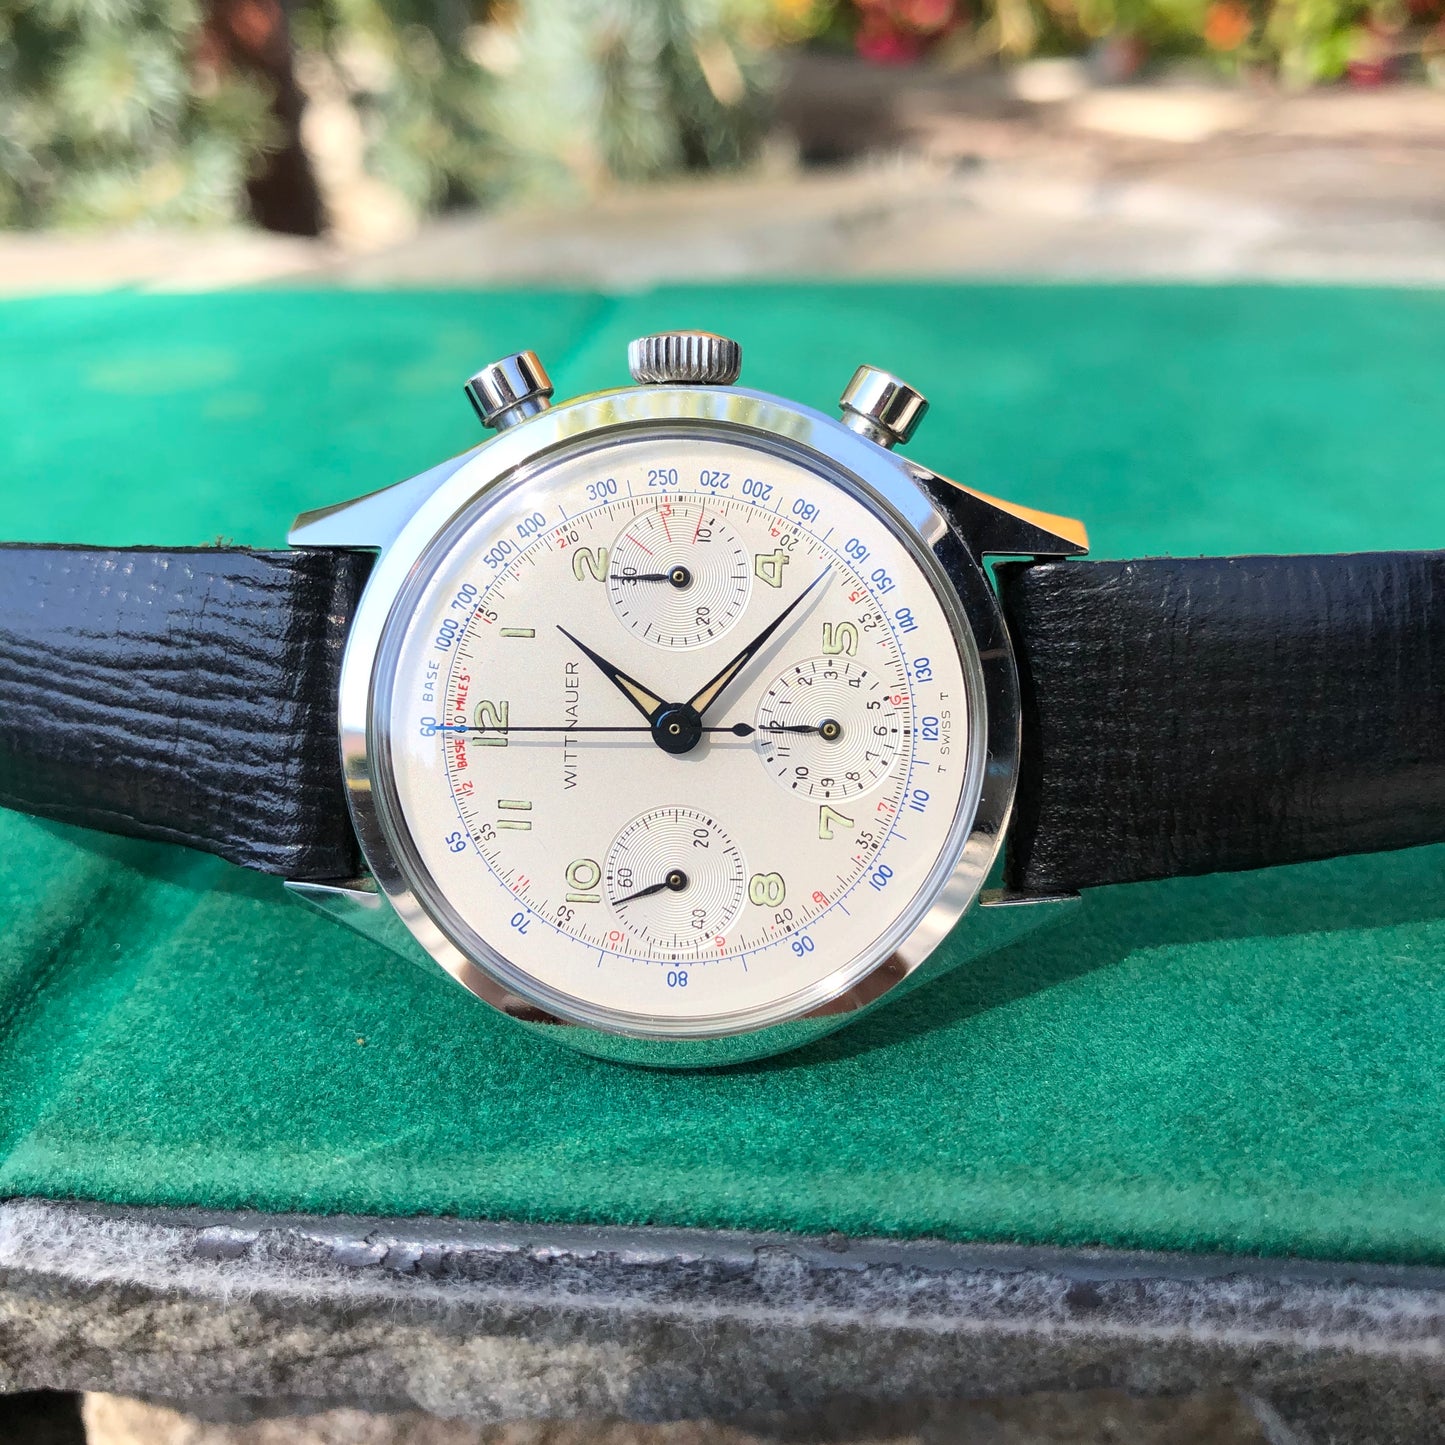 Vintage Wittnauer 6002 Stainless Steel Chronograph Valjoux 72 36mm Wristwatch Circa 1960's - Hashtag Watch Company